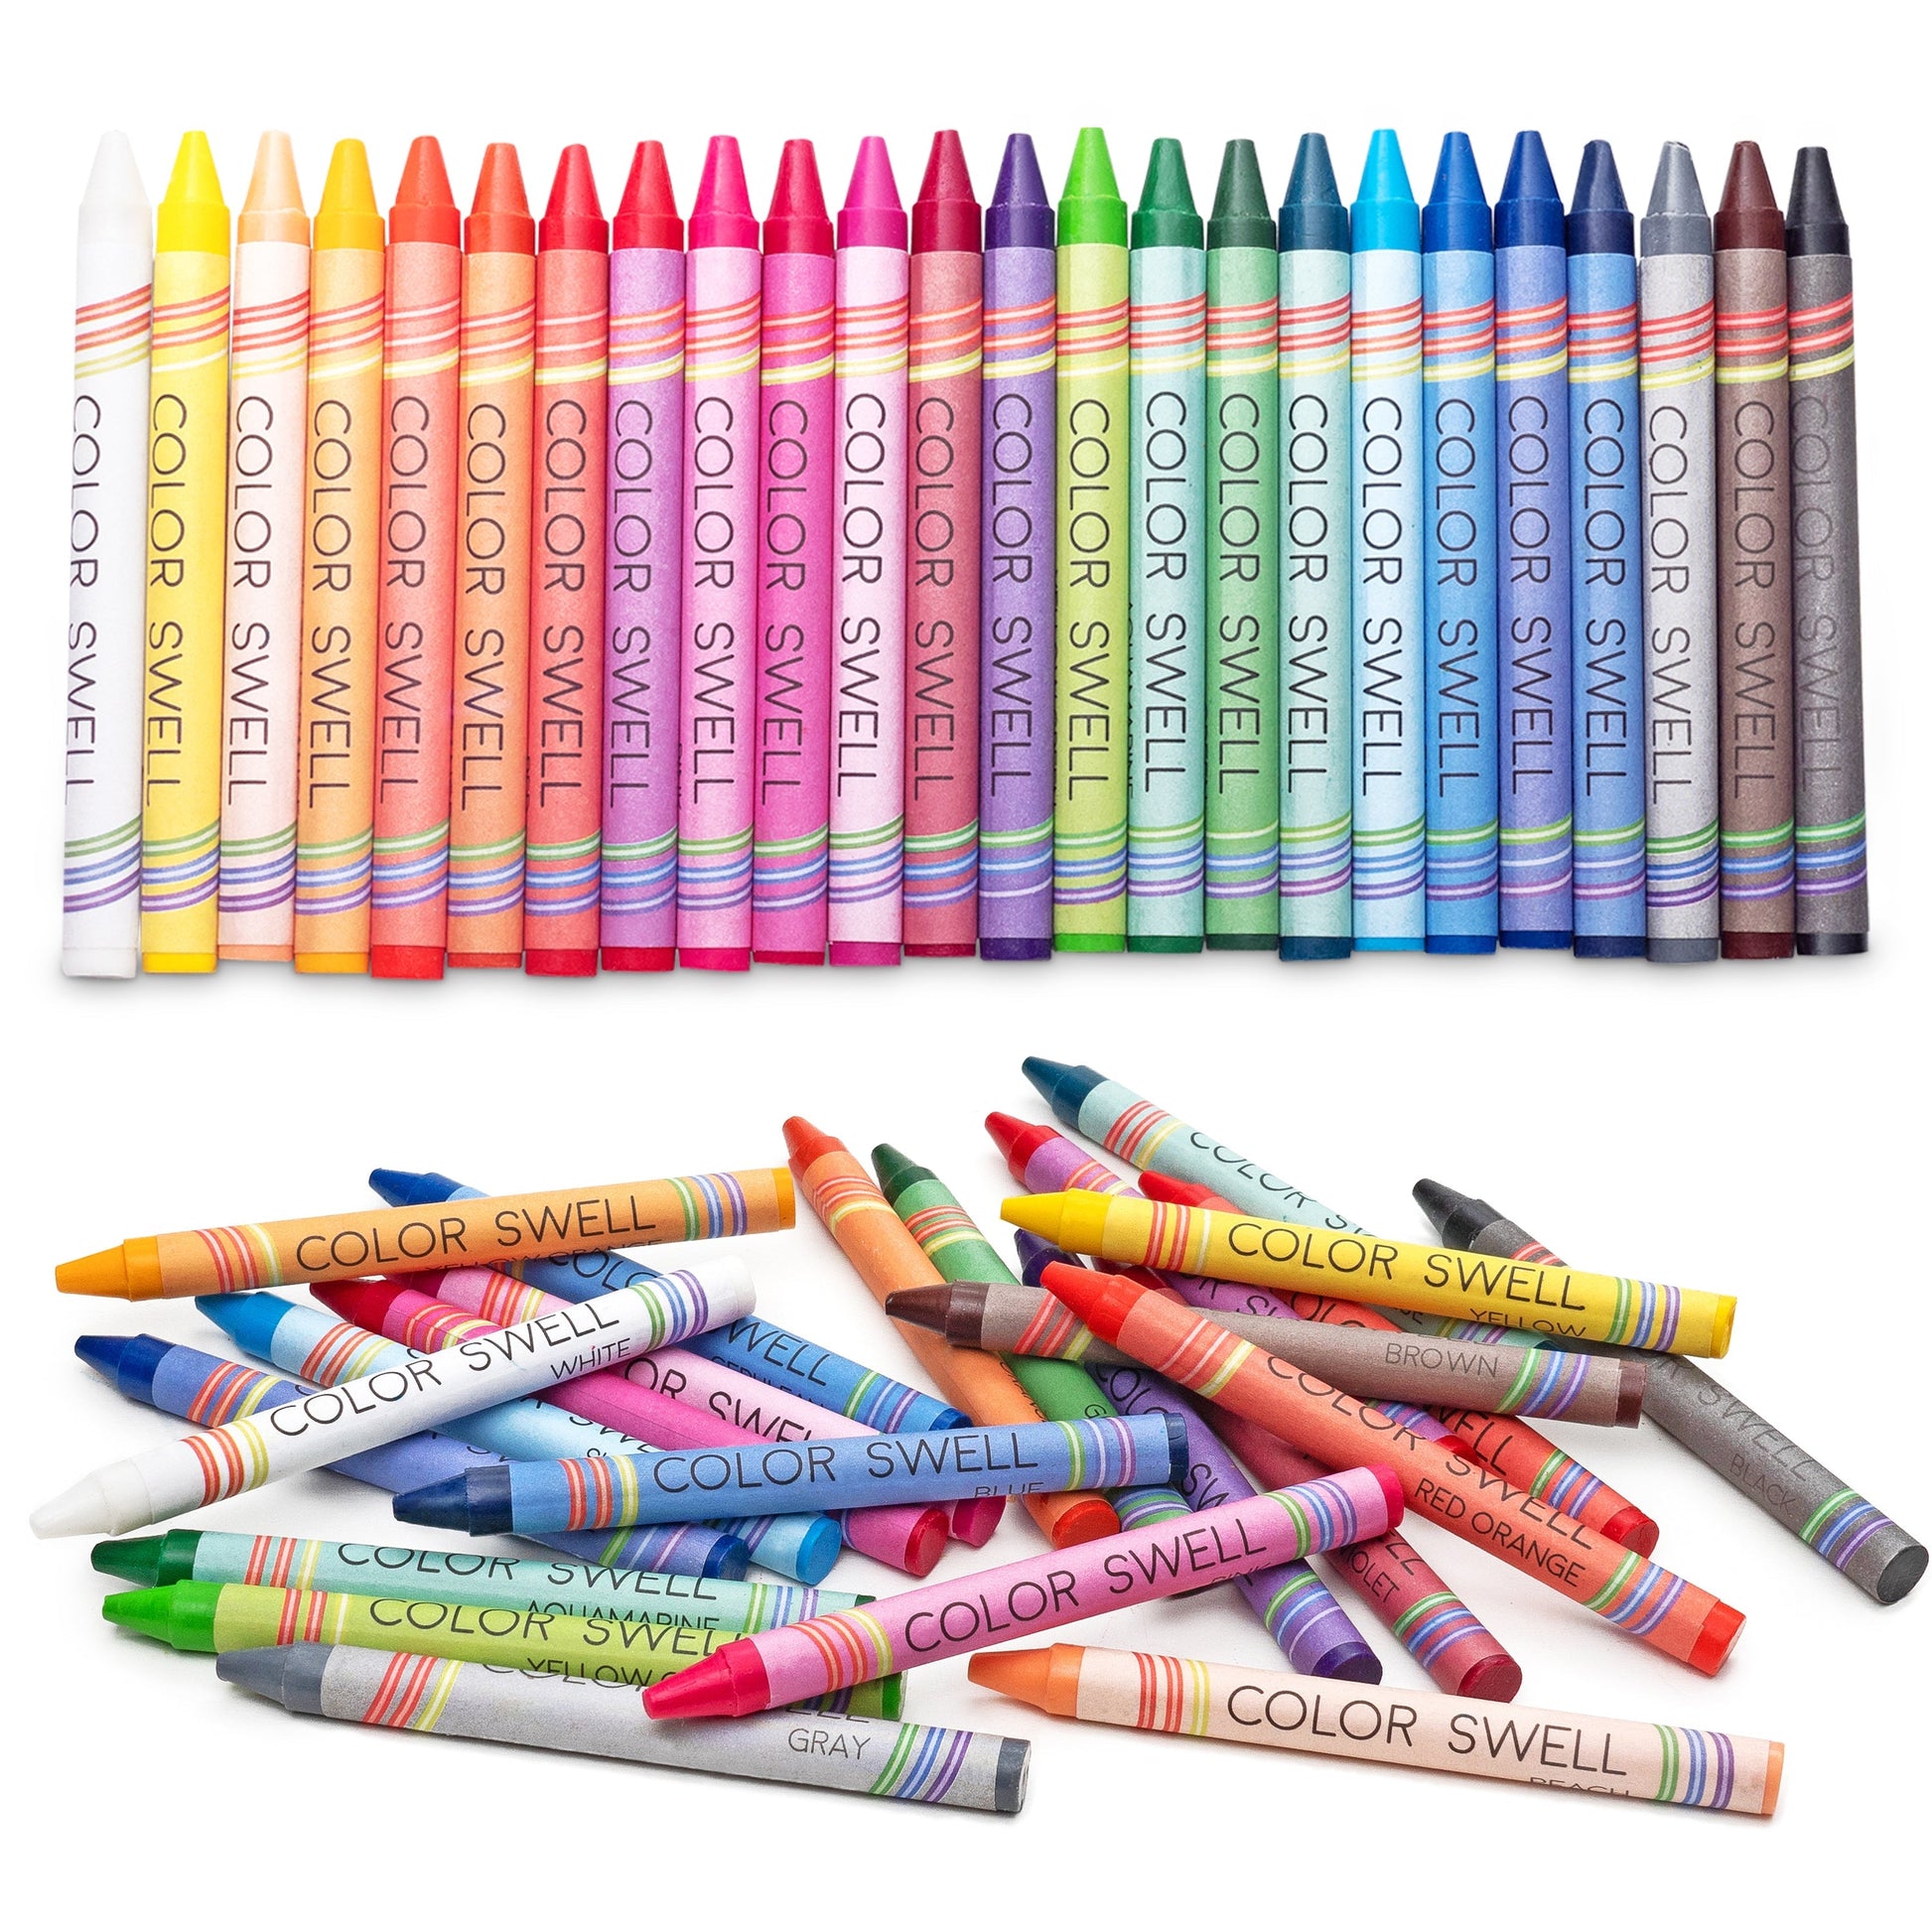 Color Swell Bulk Crayon (36 Packs, 864 Crayons) Color Swell